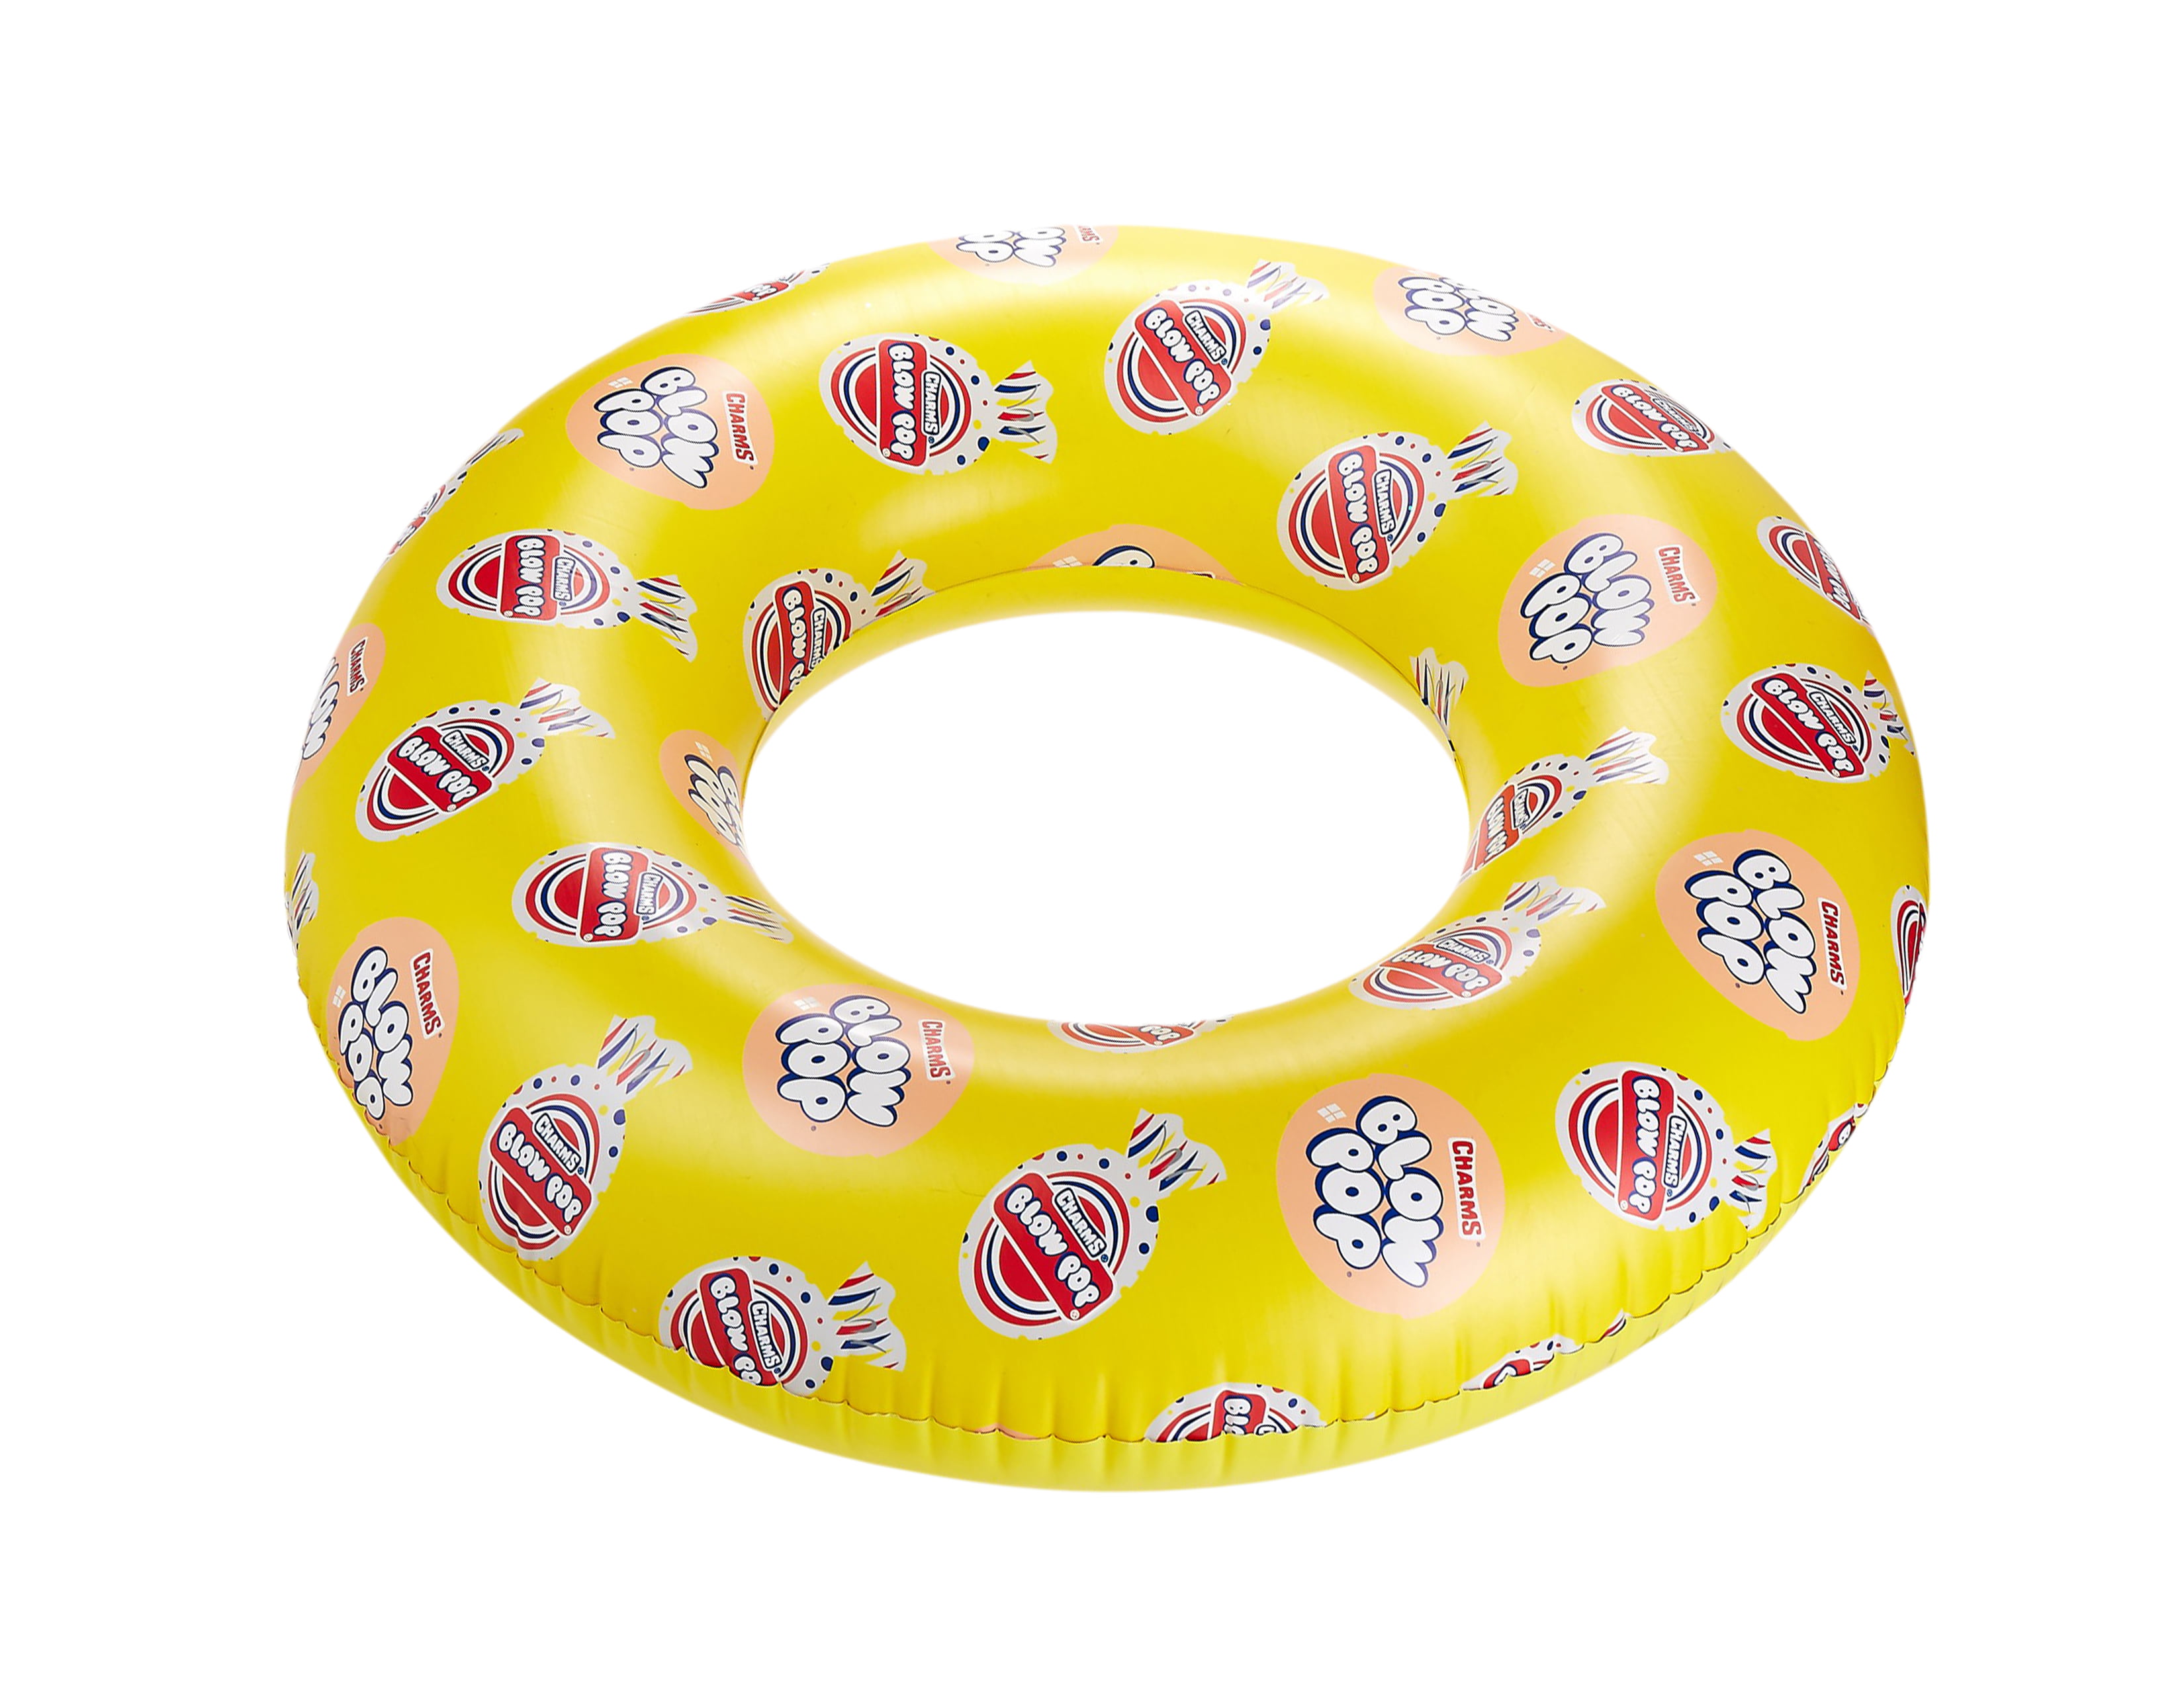 Intex Inflatable Sprinkle Donut Pool Tube Float 42in X 39in for sale online 